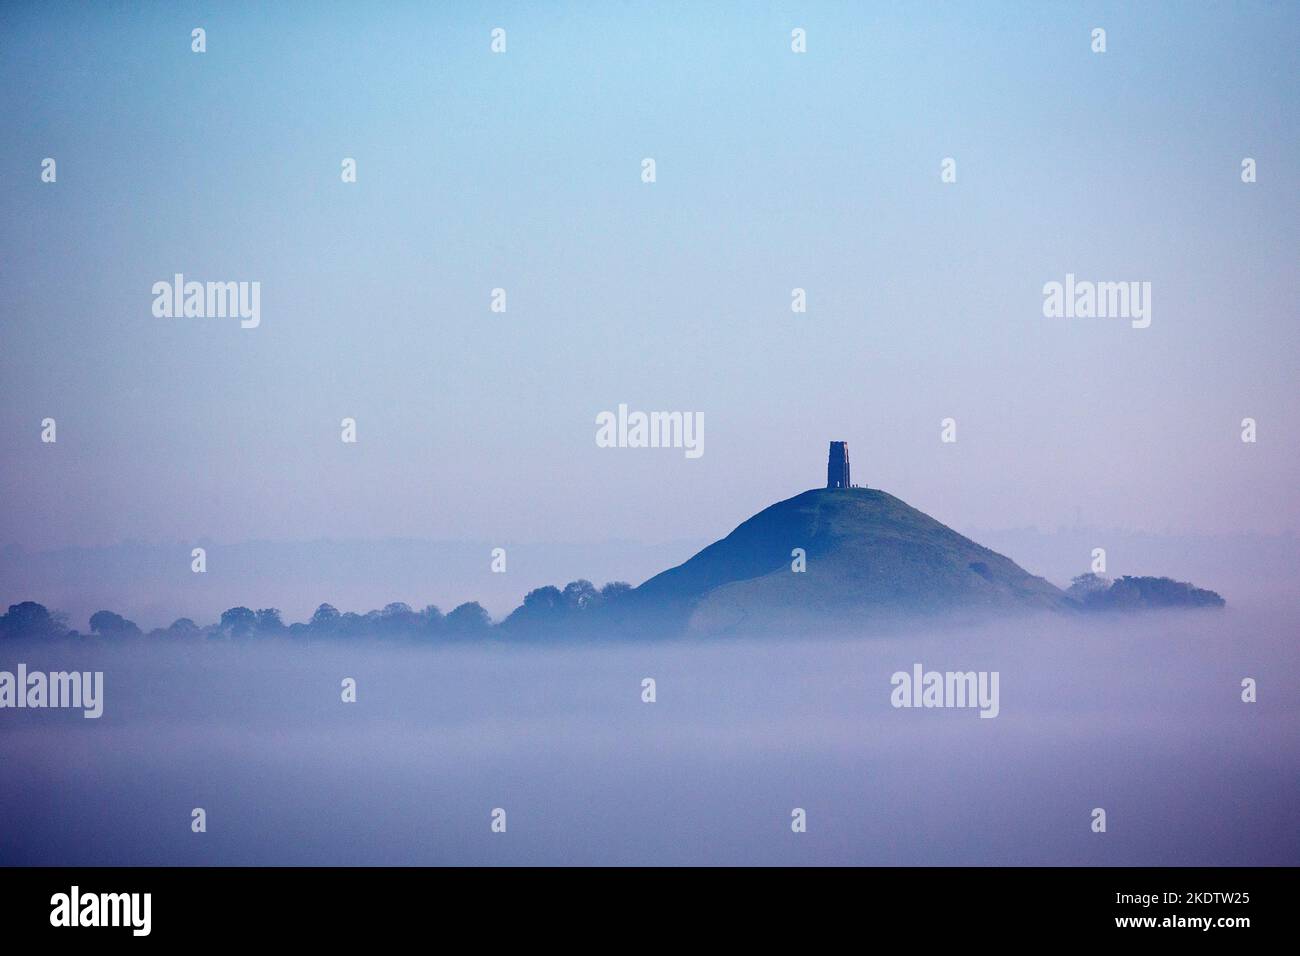 Glastonbury Tor and St Michael's Tower with the town of Street in early morning mist from Walton Hill, Somerset, England, UK, October 2018 Stock Photo